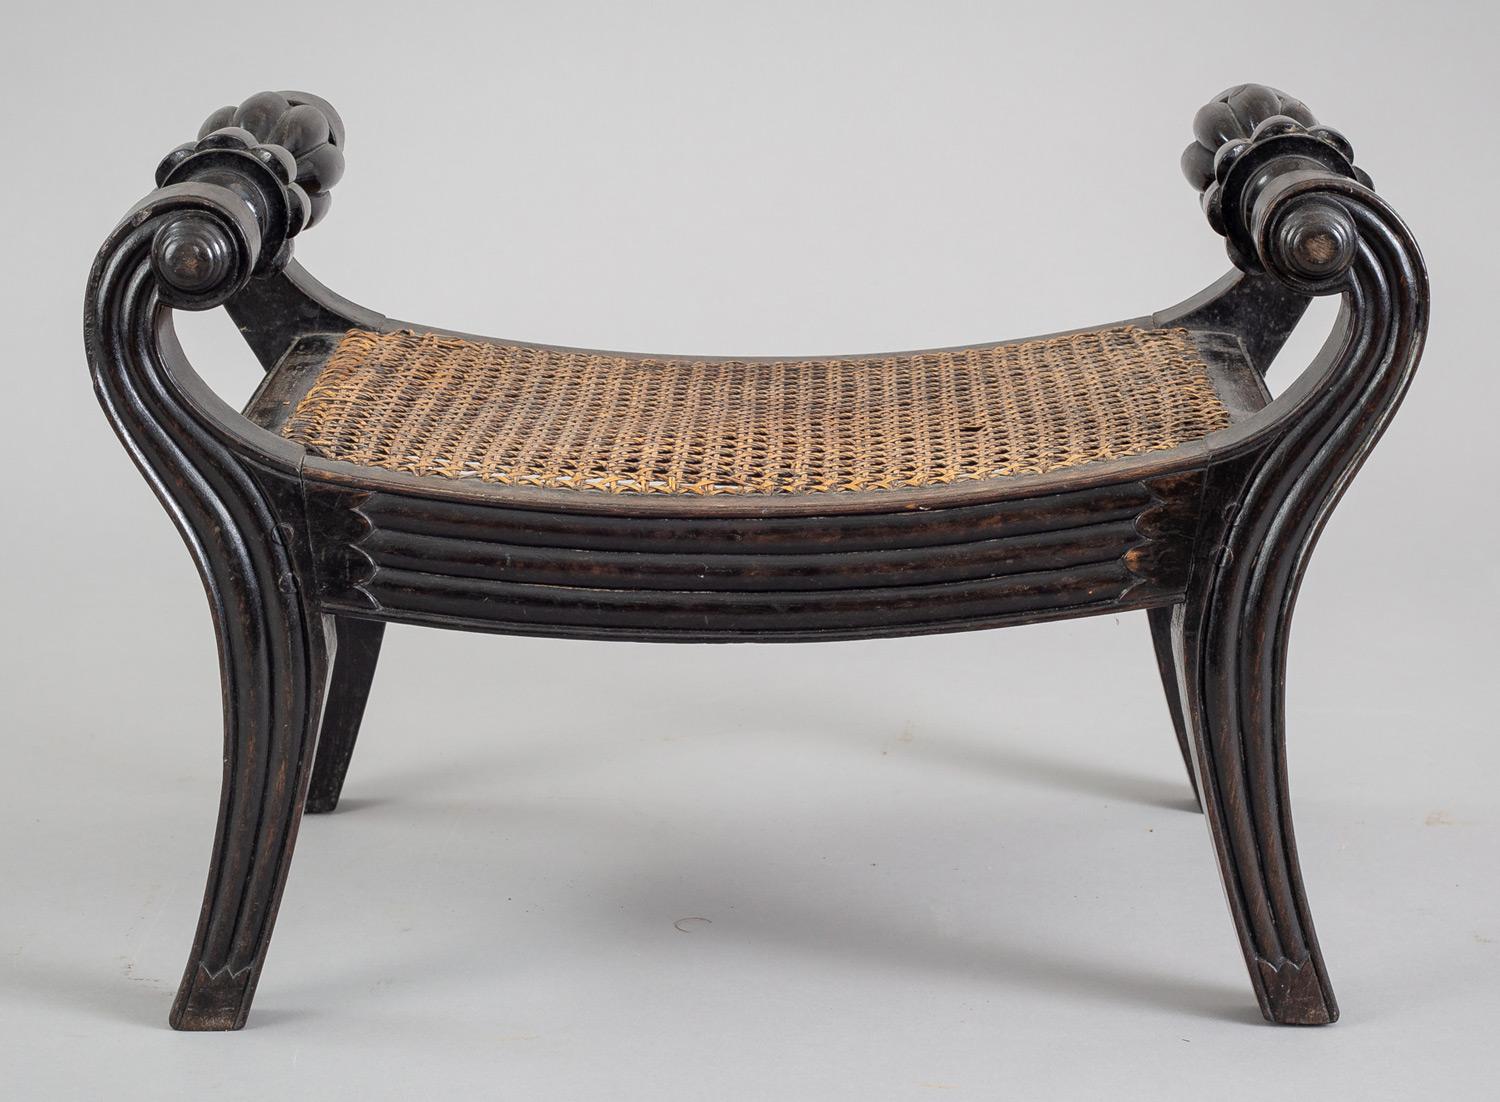 Regency Anglo-Indian carved ebony footstool with beautifully carved handles, caned seat, raised on splayed legs.